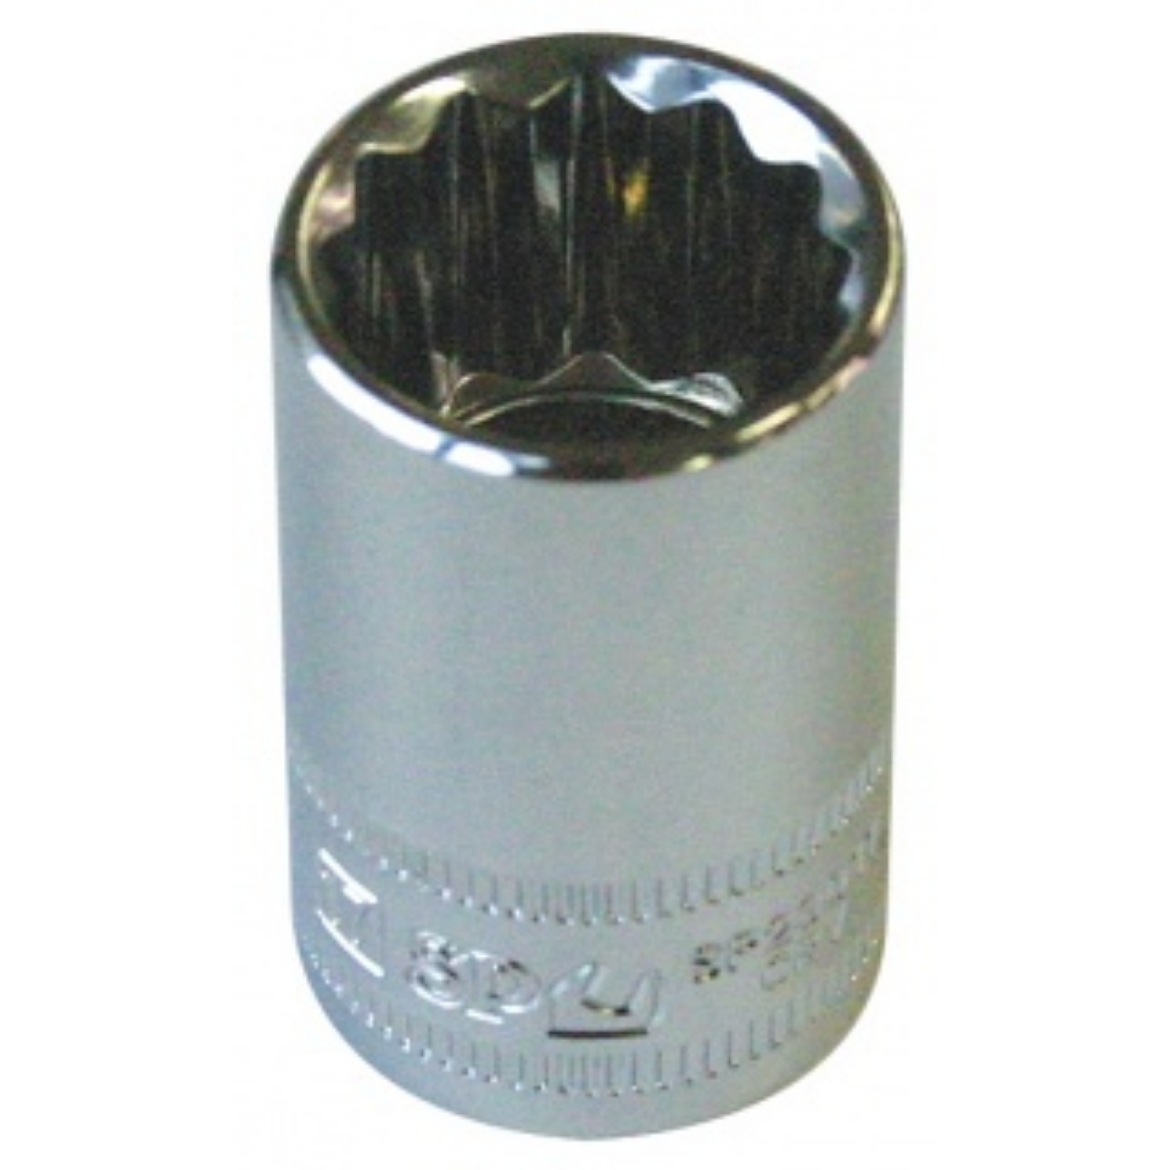 Picture of SOCKET1/2"DR 12PT METRIC 22MM SP TOOLS